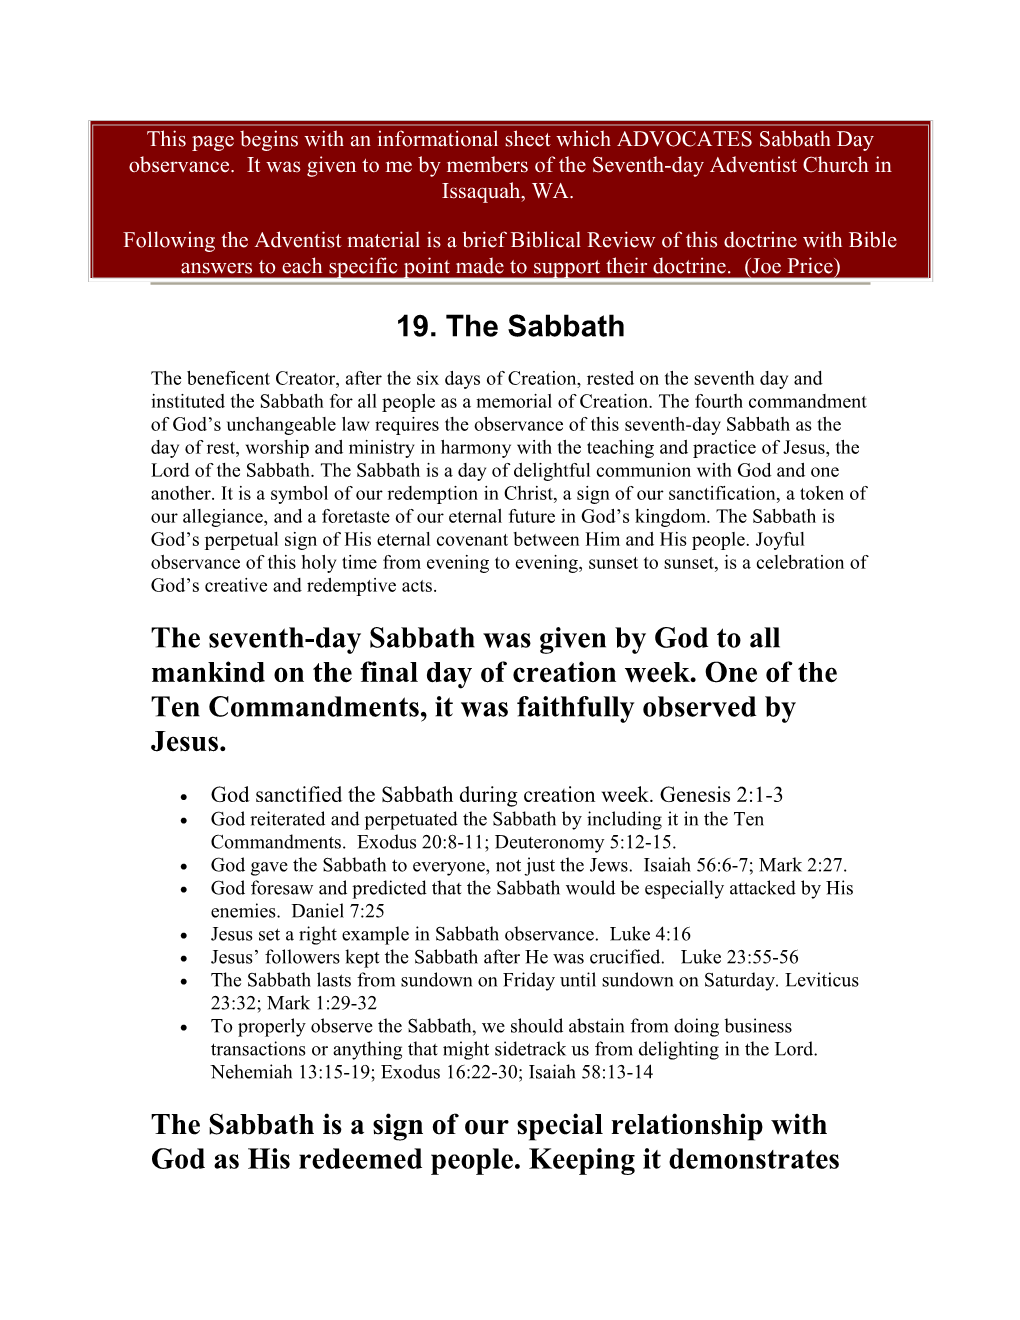 This Page Begins with an Informational Sheet Which ADVOCATES Sabbath Day Observance